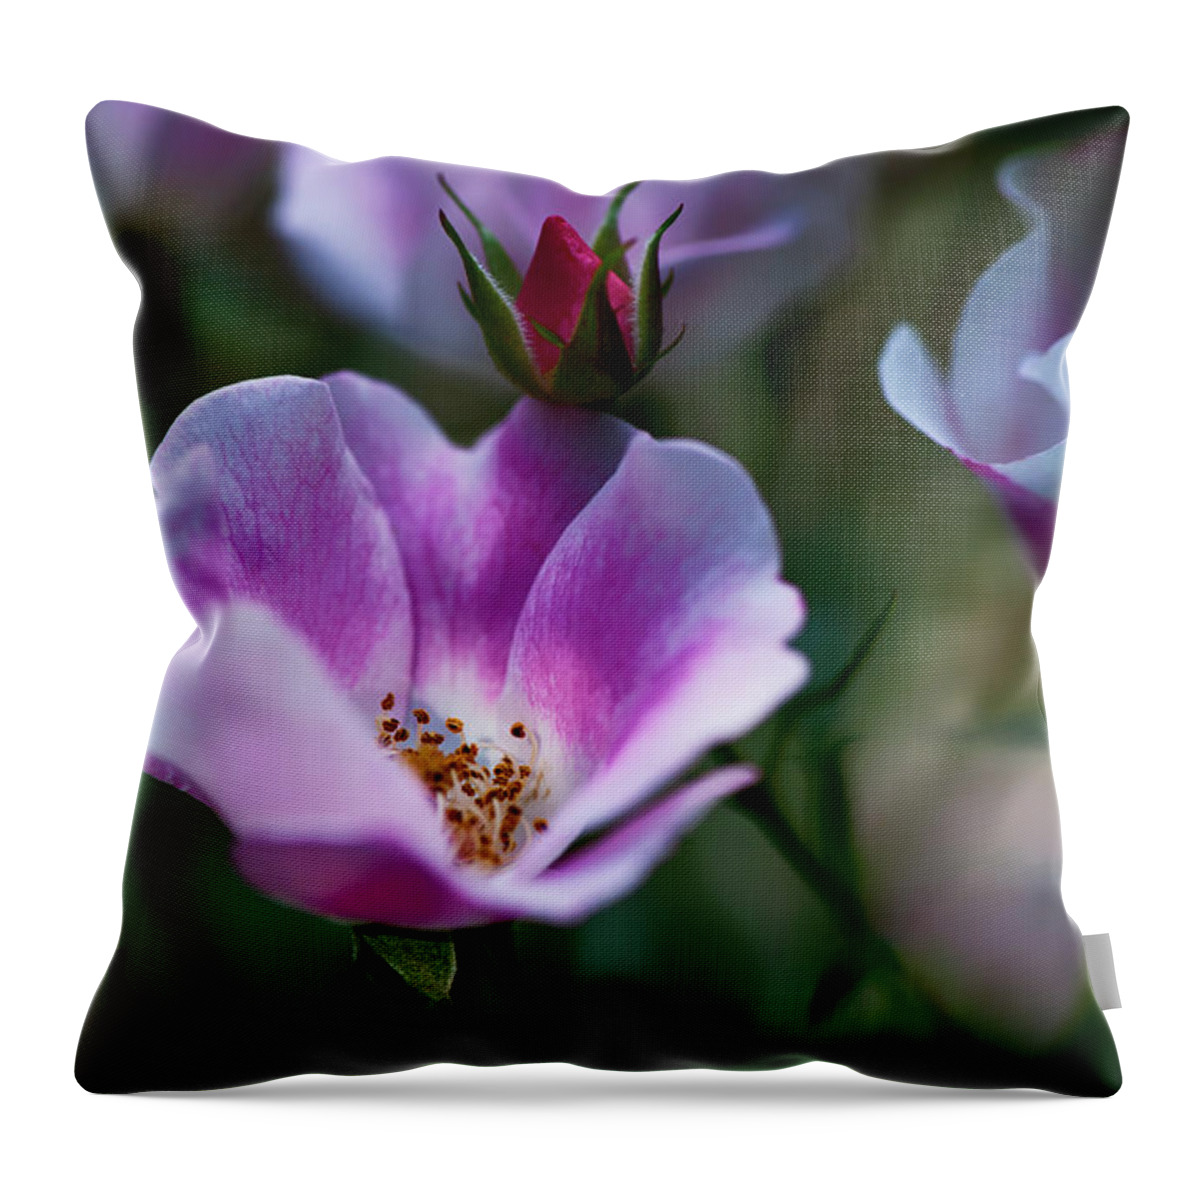  Throw Pillow featuring the photograph Wild Rose 7 by Dan Hefle